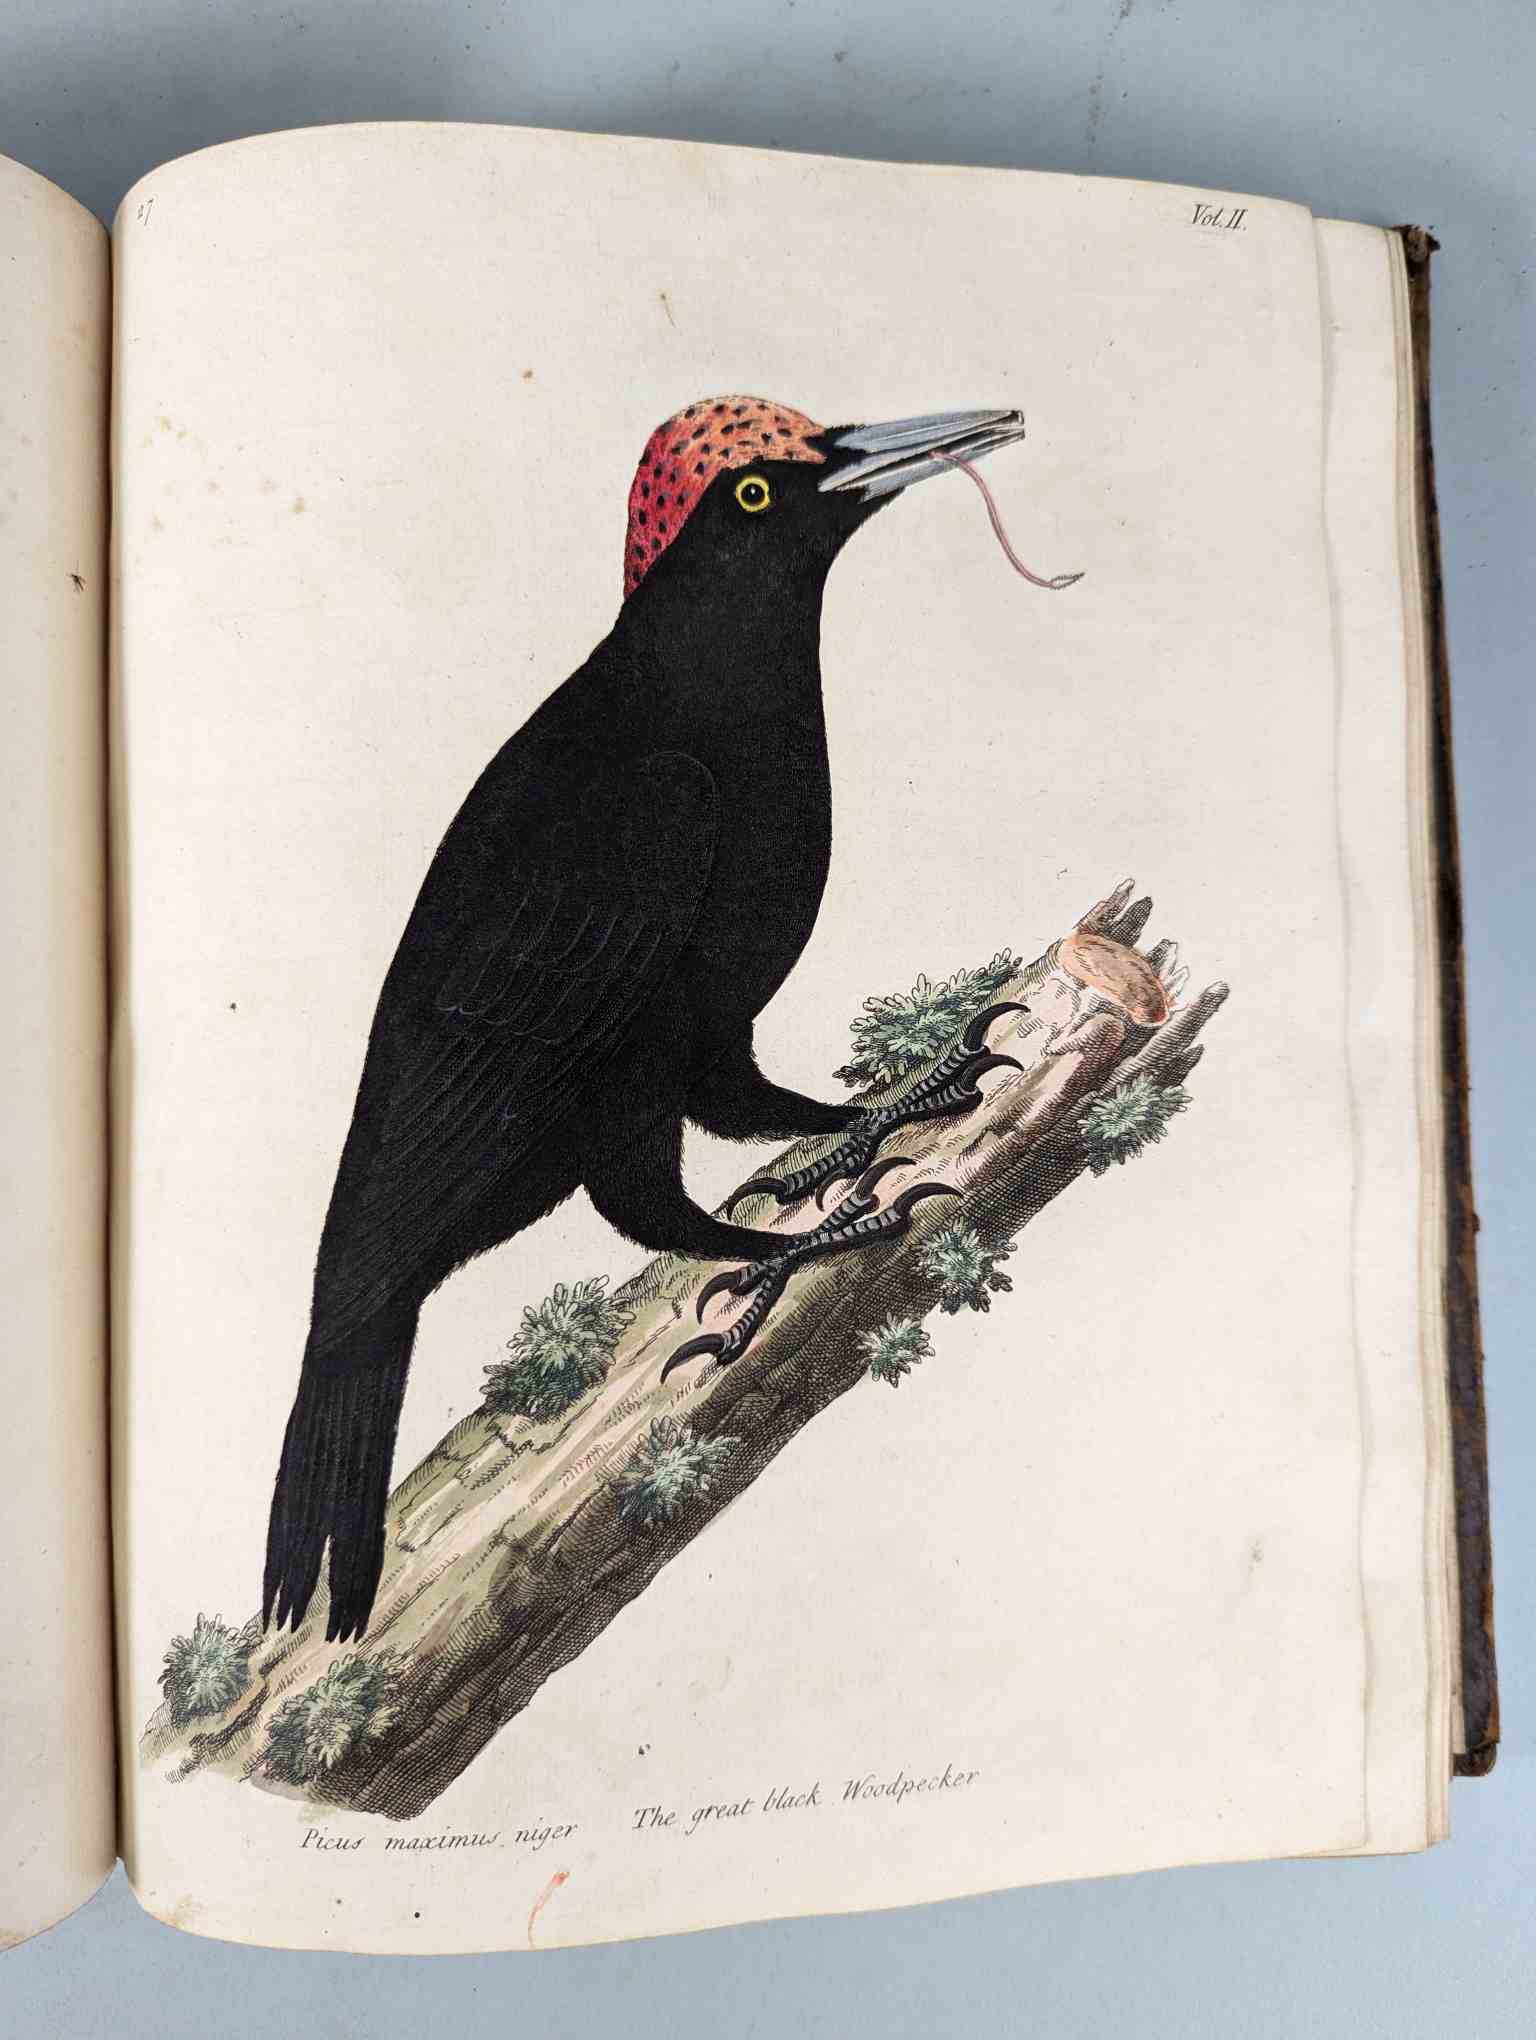 ALBIN, Eleazar. A Natural History of Birds, to which are added, Notes and Observations by W. - Image 131 of 208